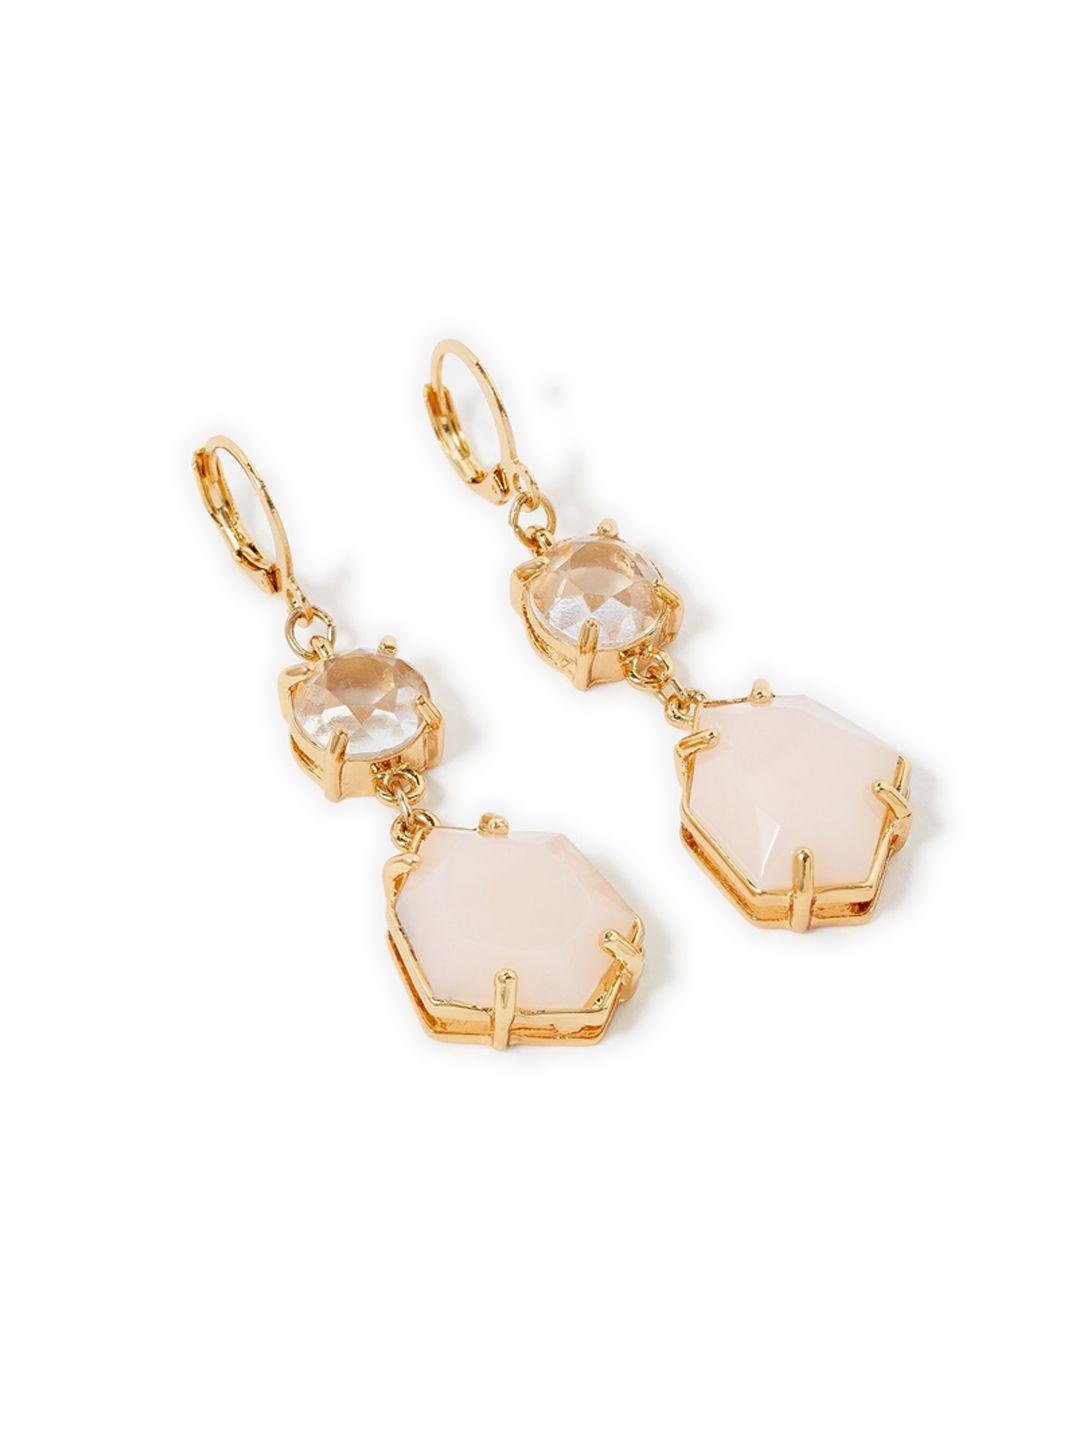 accessorize london pink & gold-toned contemporary drop earrings